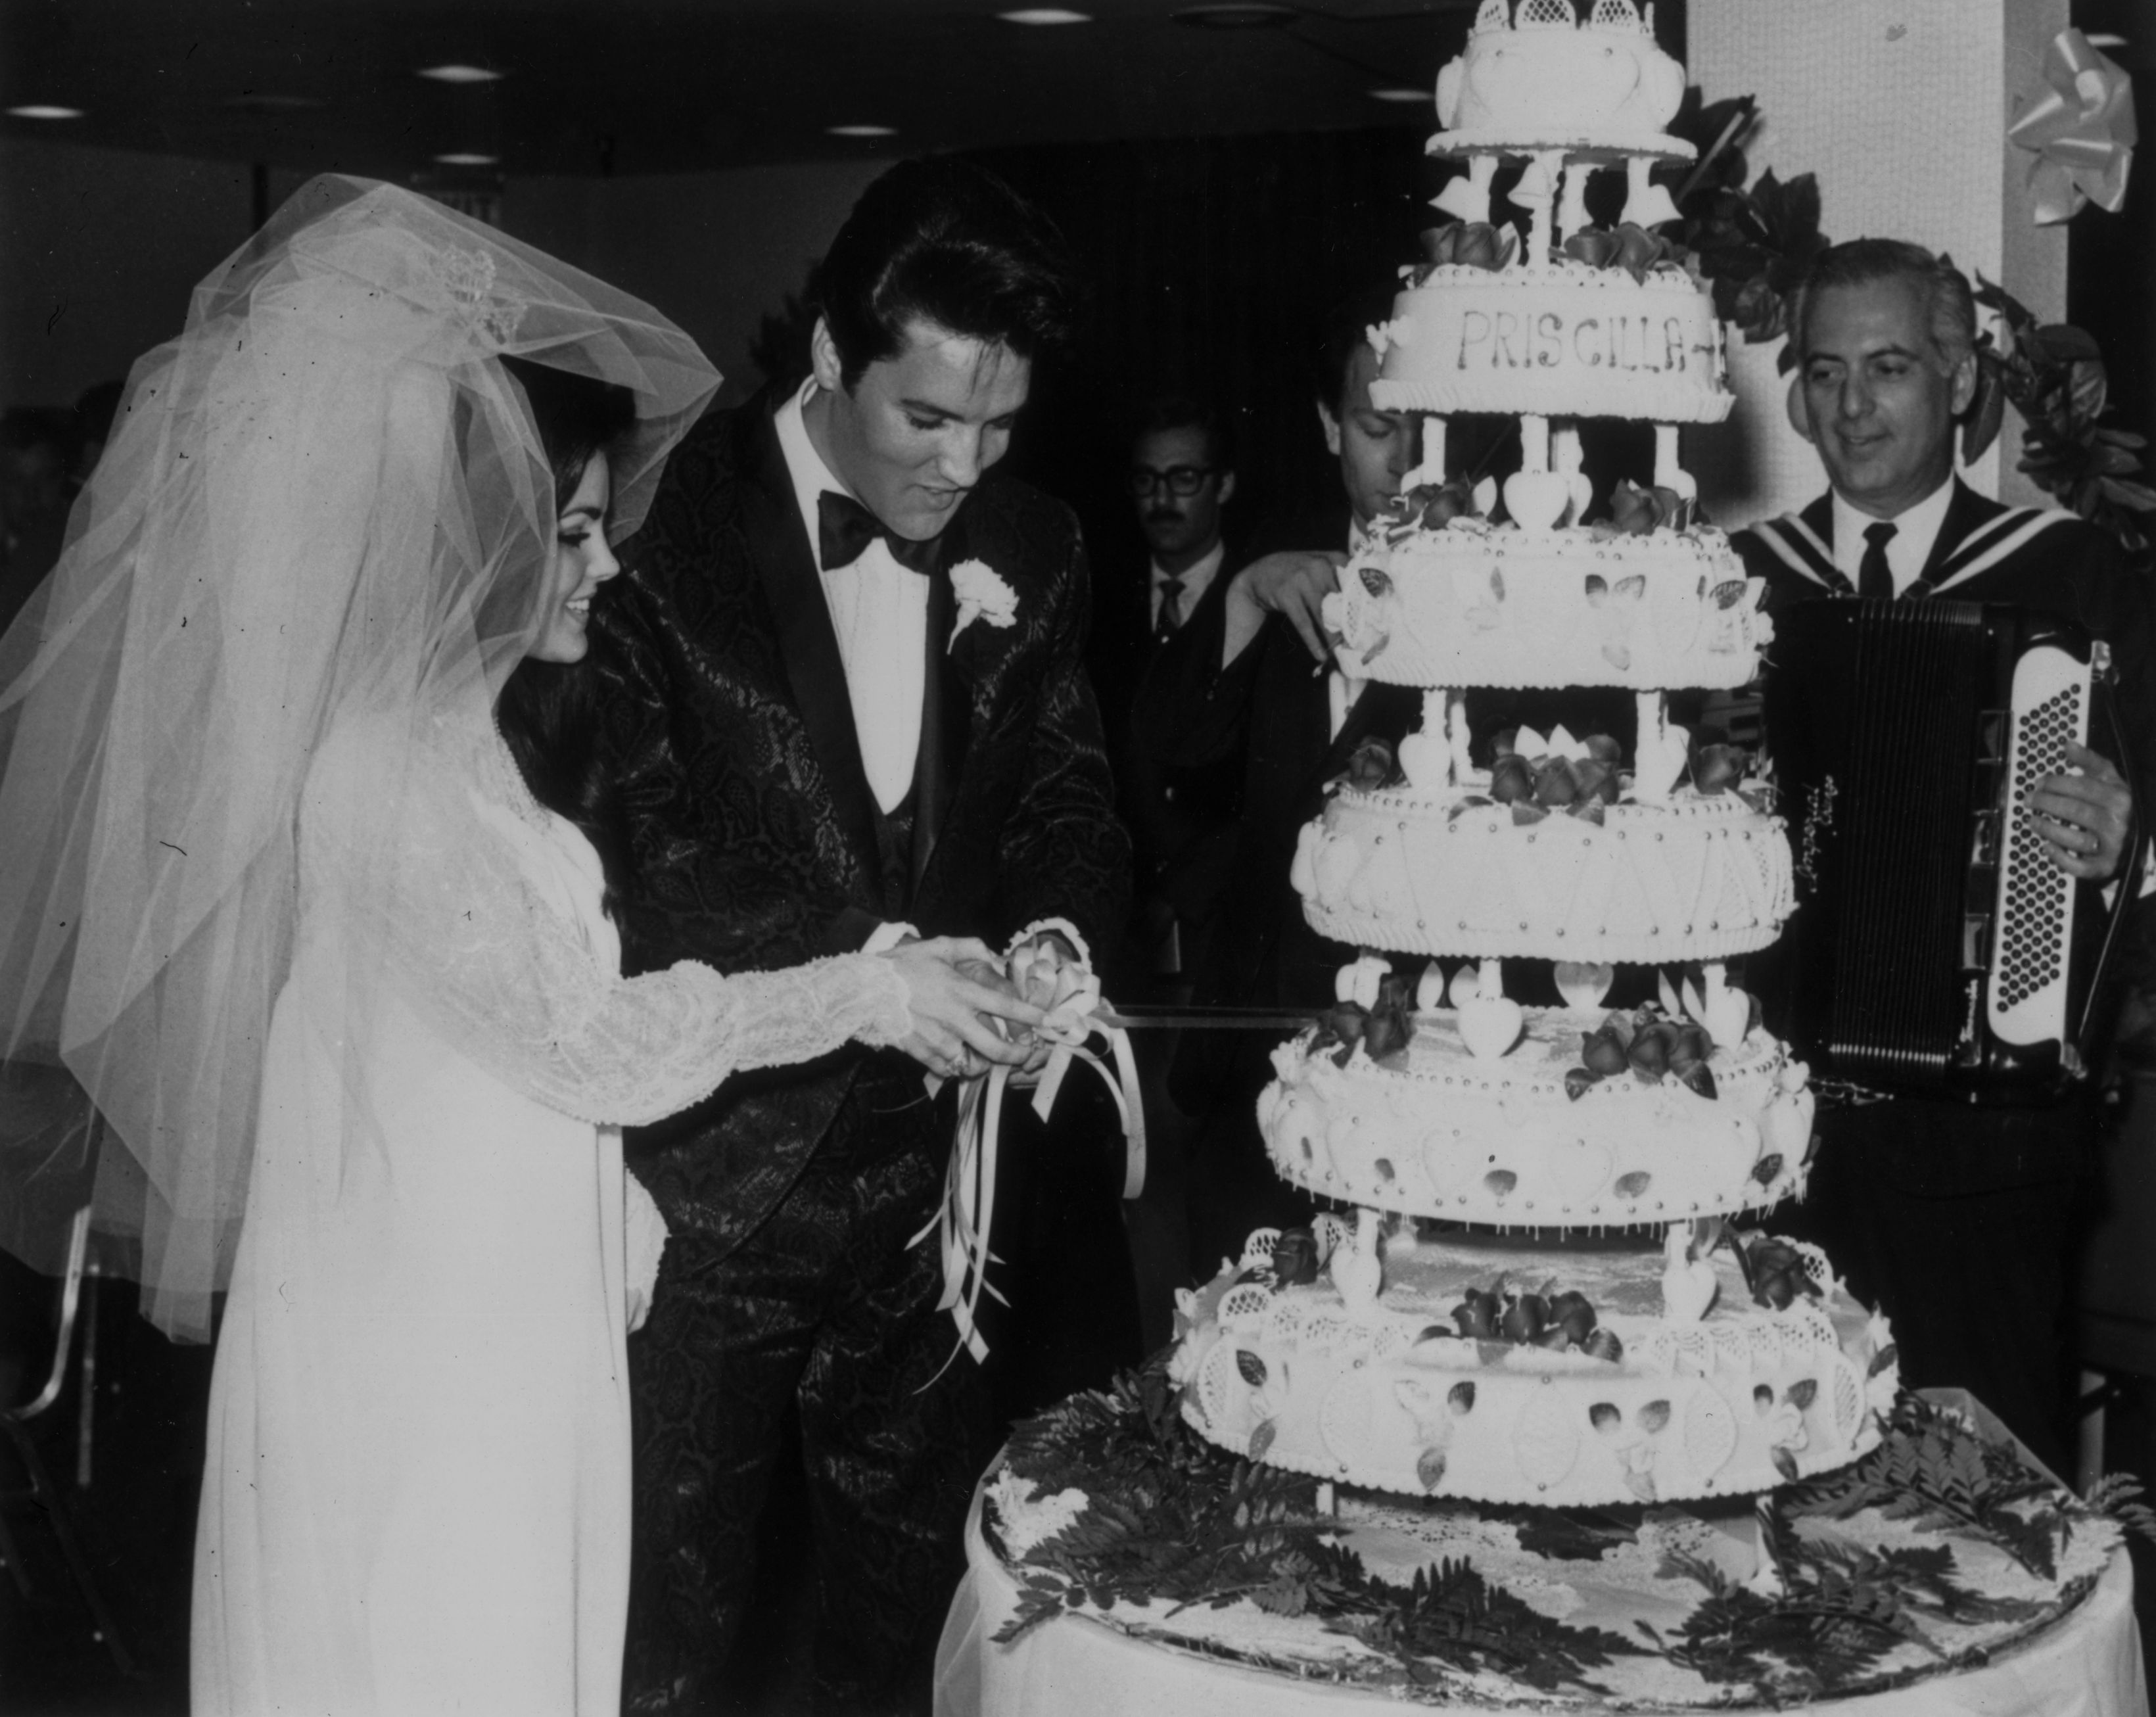 Priscilla and Elvis on their wedding day. I Image: Getty Images.